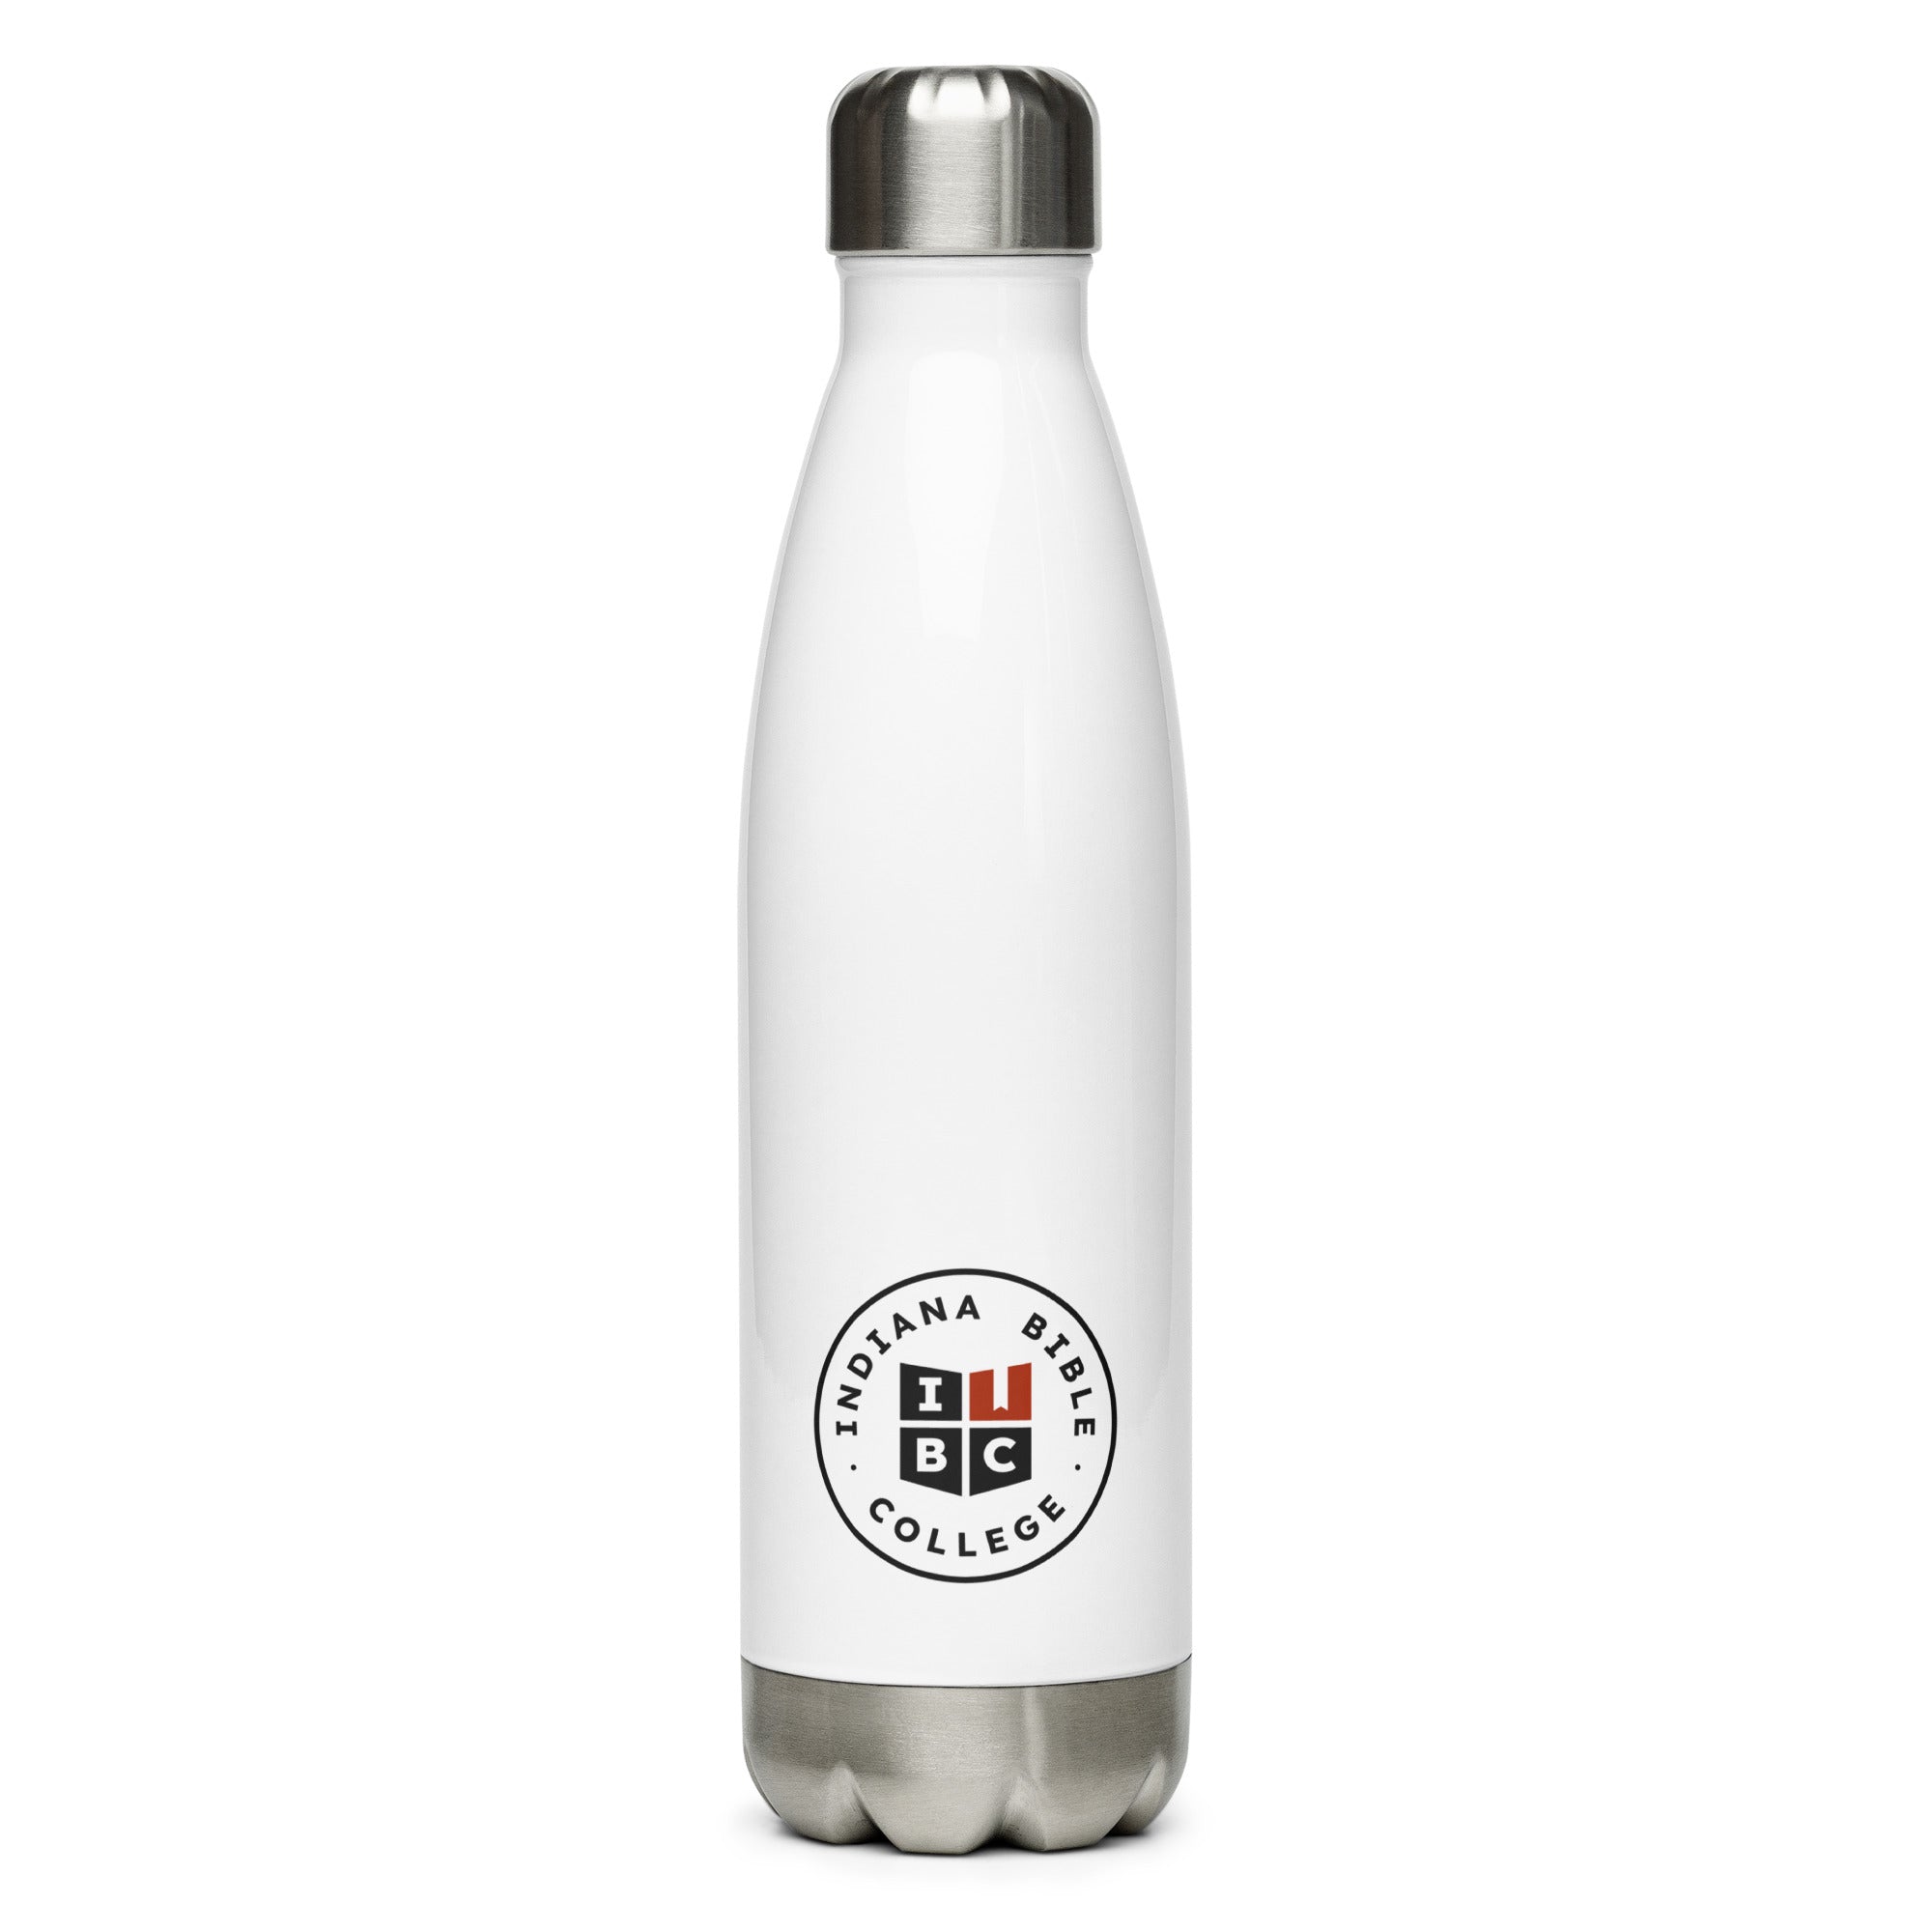 IBC Stainless Steel Water Bottle